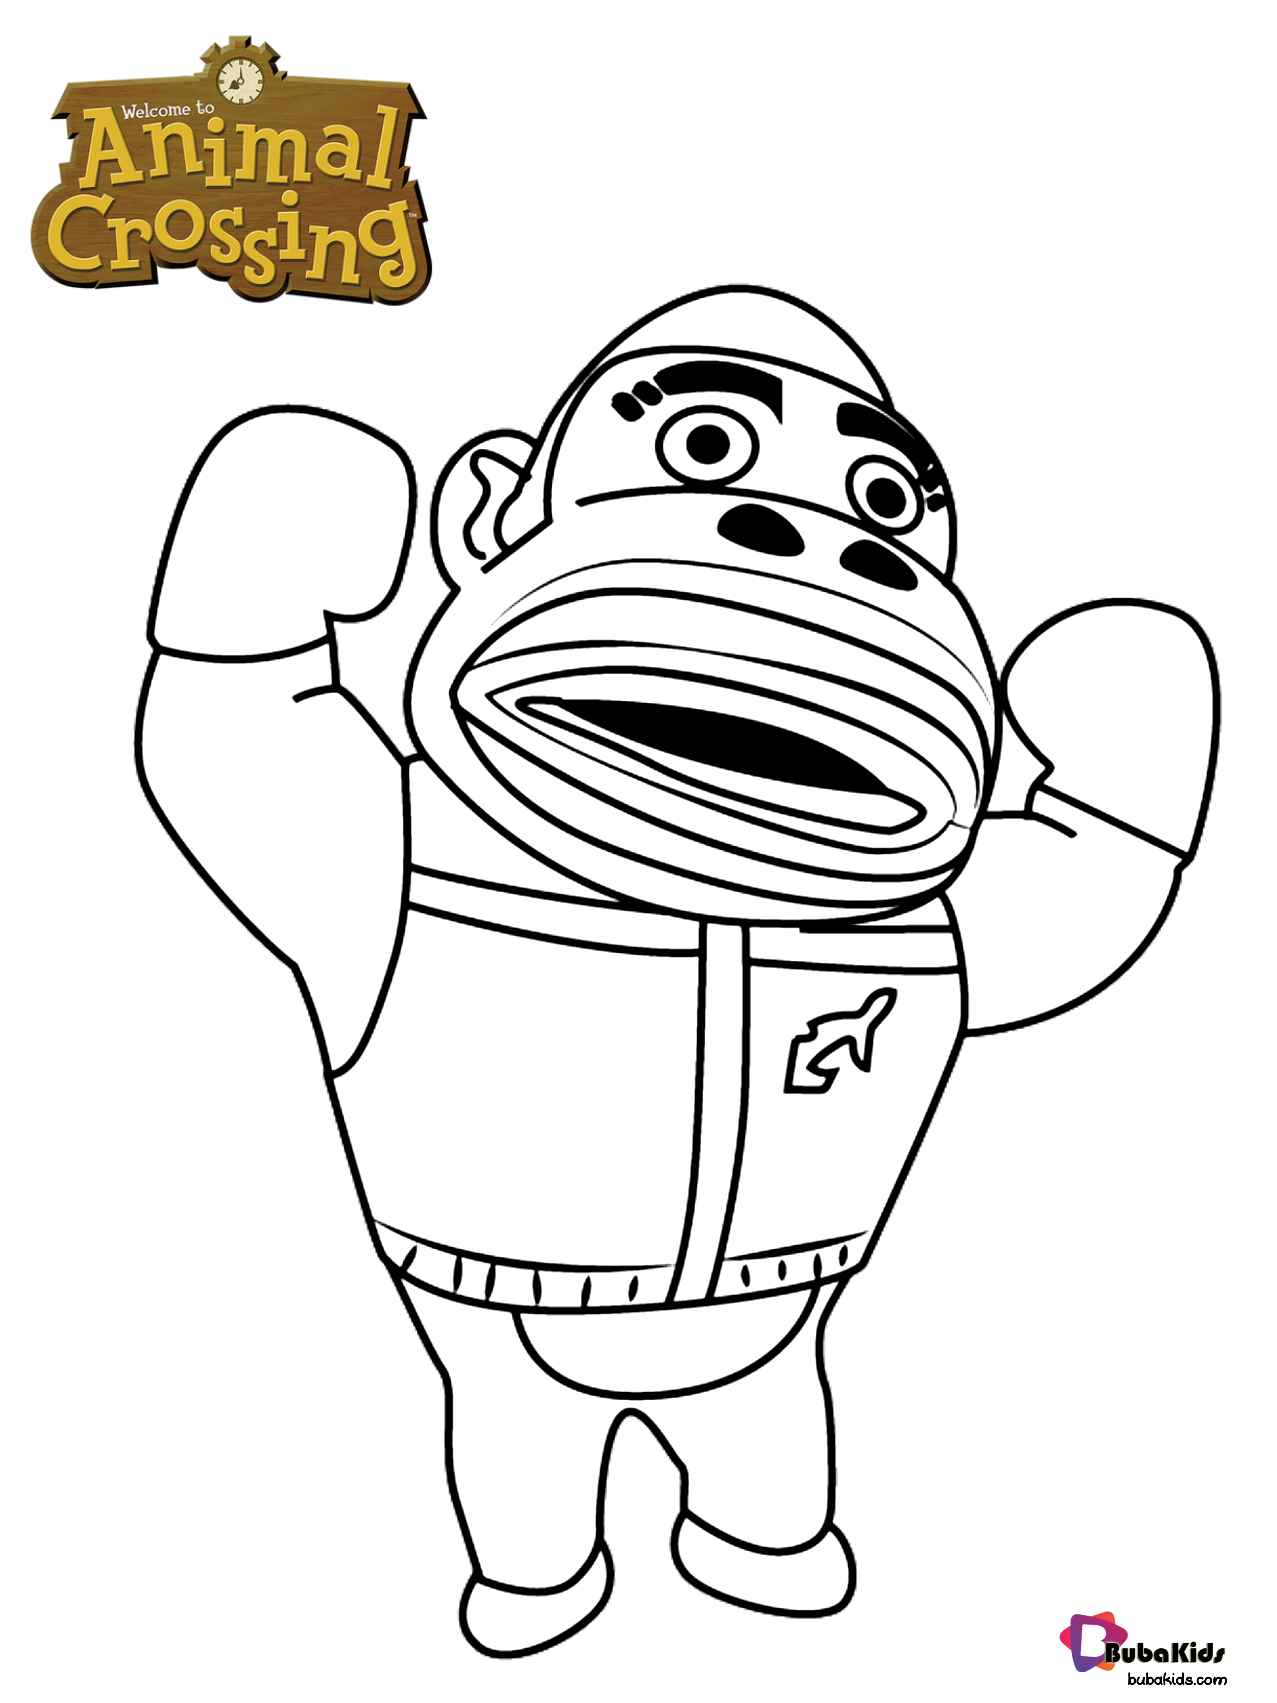 Al the gorilla character from Animal Crossing video games coloring page Wallpaper